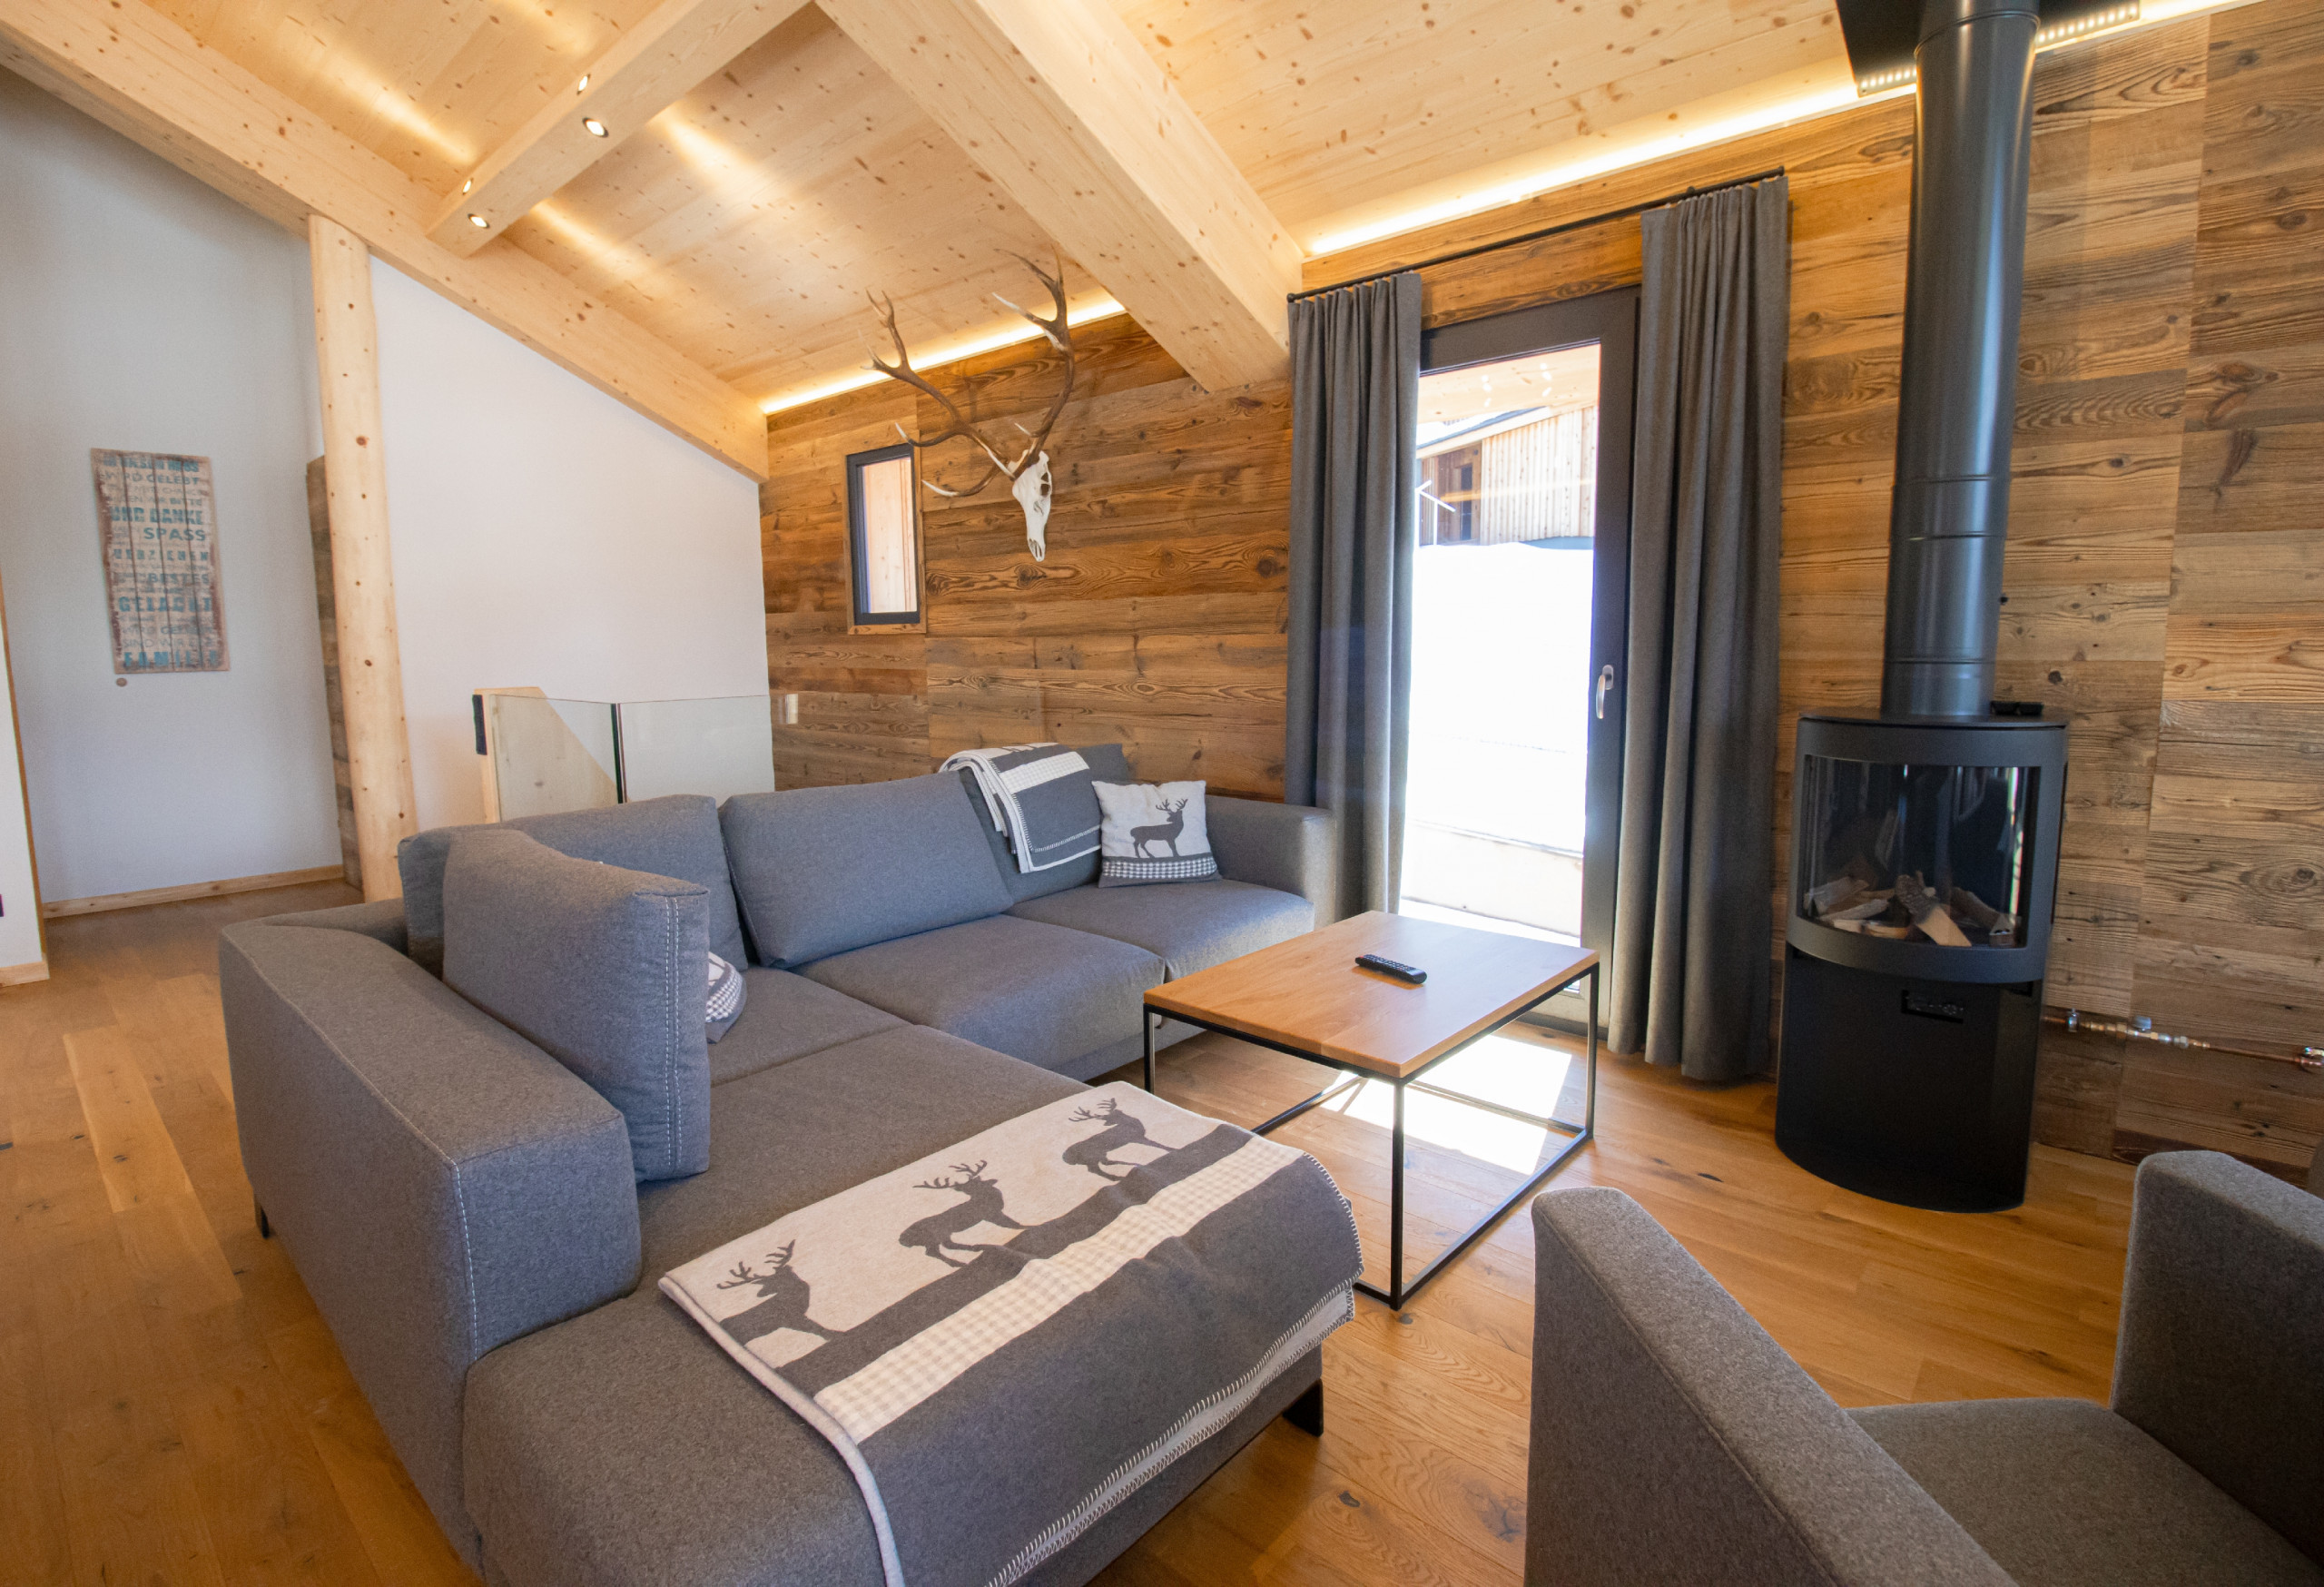  in Haus im Ennstal - Superior Chalet with 3 bedrooms and sauna & pool